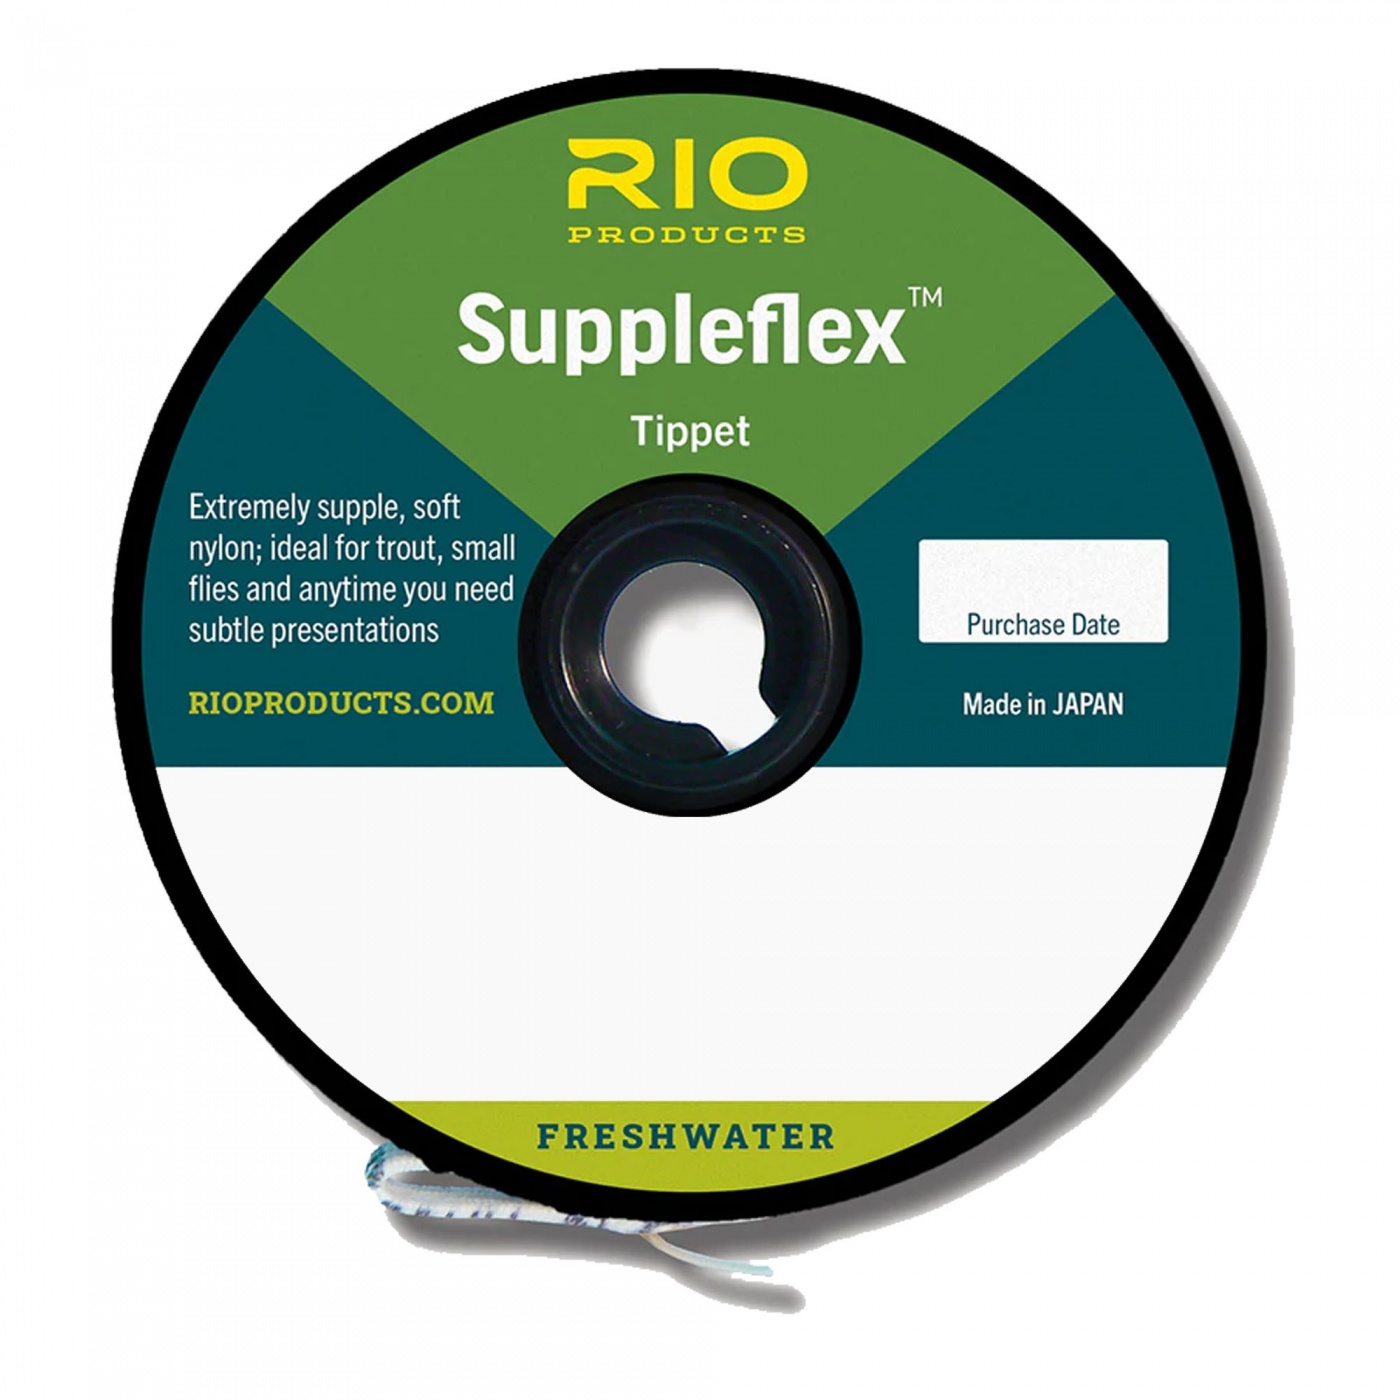 Rio Products Suppleflex Tippet 6X 3.0lb / 1.3kg For Fly Fishing